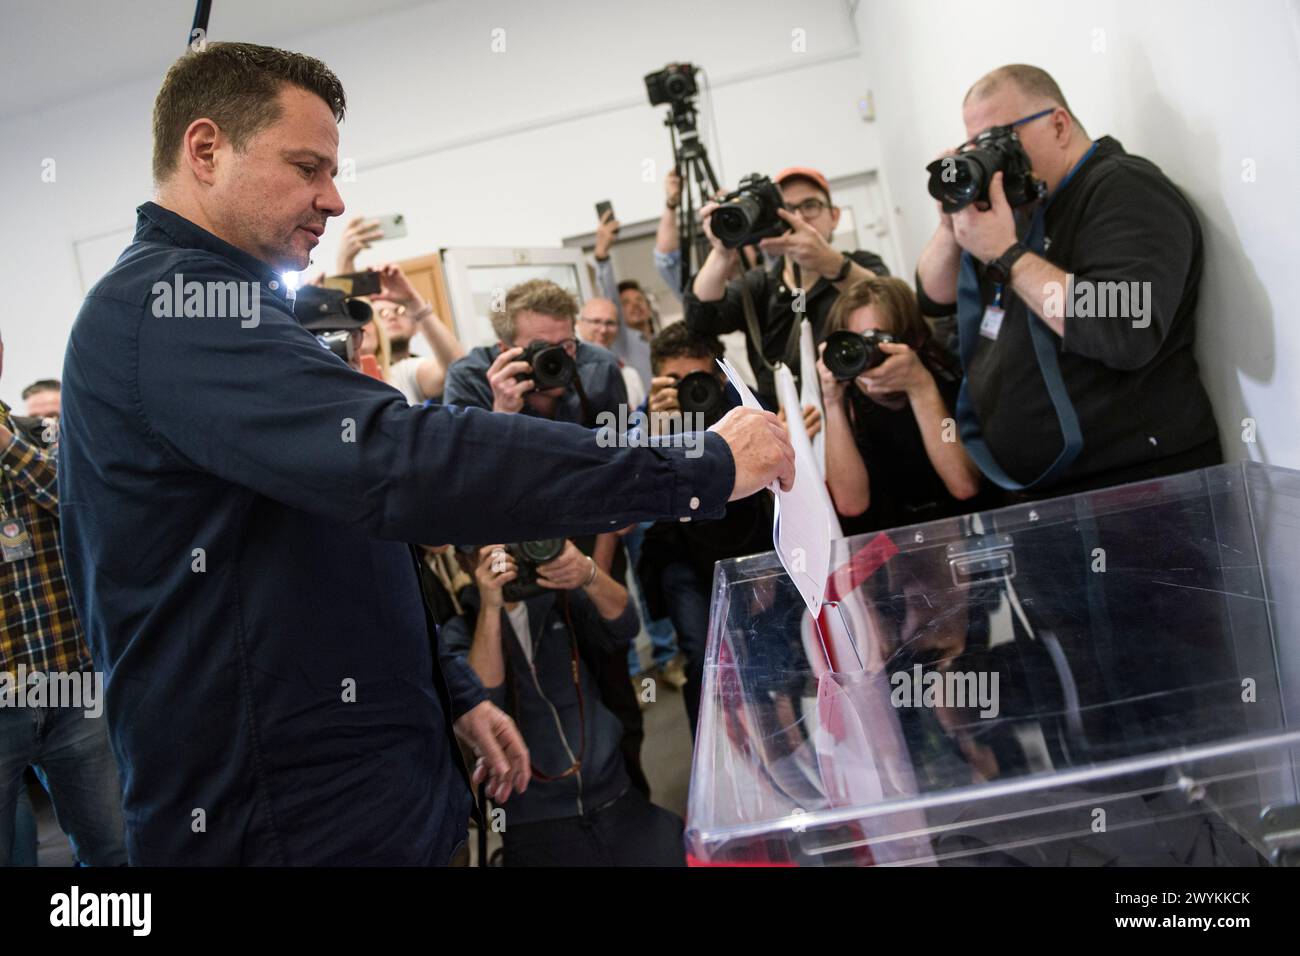 Rafal Trzaskowski, Mayor of Warsaw who is seeking a second term, casts his vote at the polling station in Warsaw. Voters across Poland are casting ballots in local elections in the first electoral test for the coalition government of PM Donald Tusk nearly four months since it took power. Voters elected mayors as well as members of municipal councils and provincial assemblies. Among those running is Rafal Trzaskowski - Mayor of Warsaw, a Tusk ally who is seeking a second term. Opinion polls showed the two largest political formations running neck-and-neck: Tusk's Civic Coalition, an electoral Stock Photo